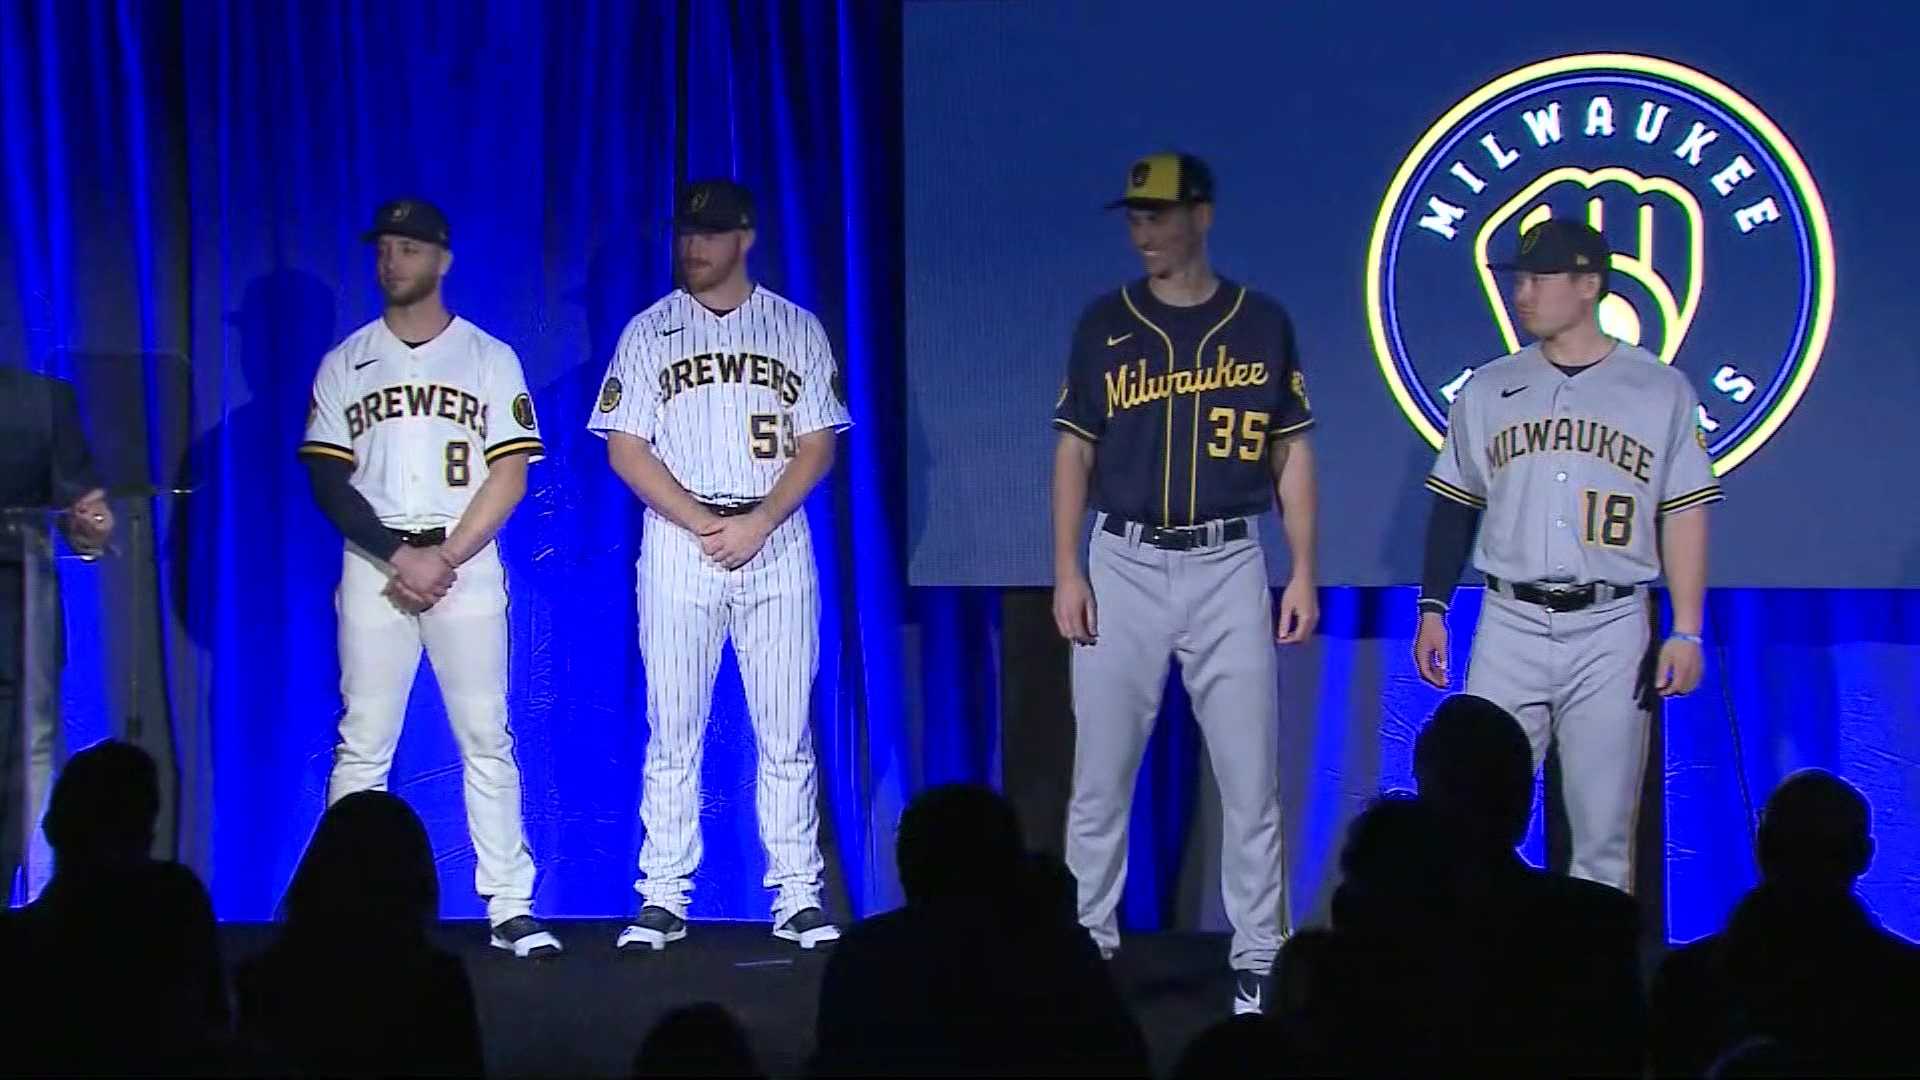 brewers uniforms 2019